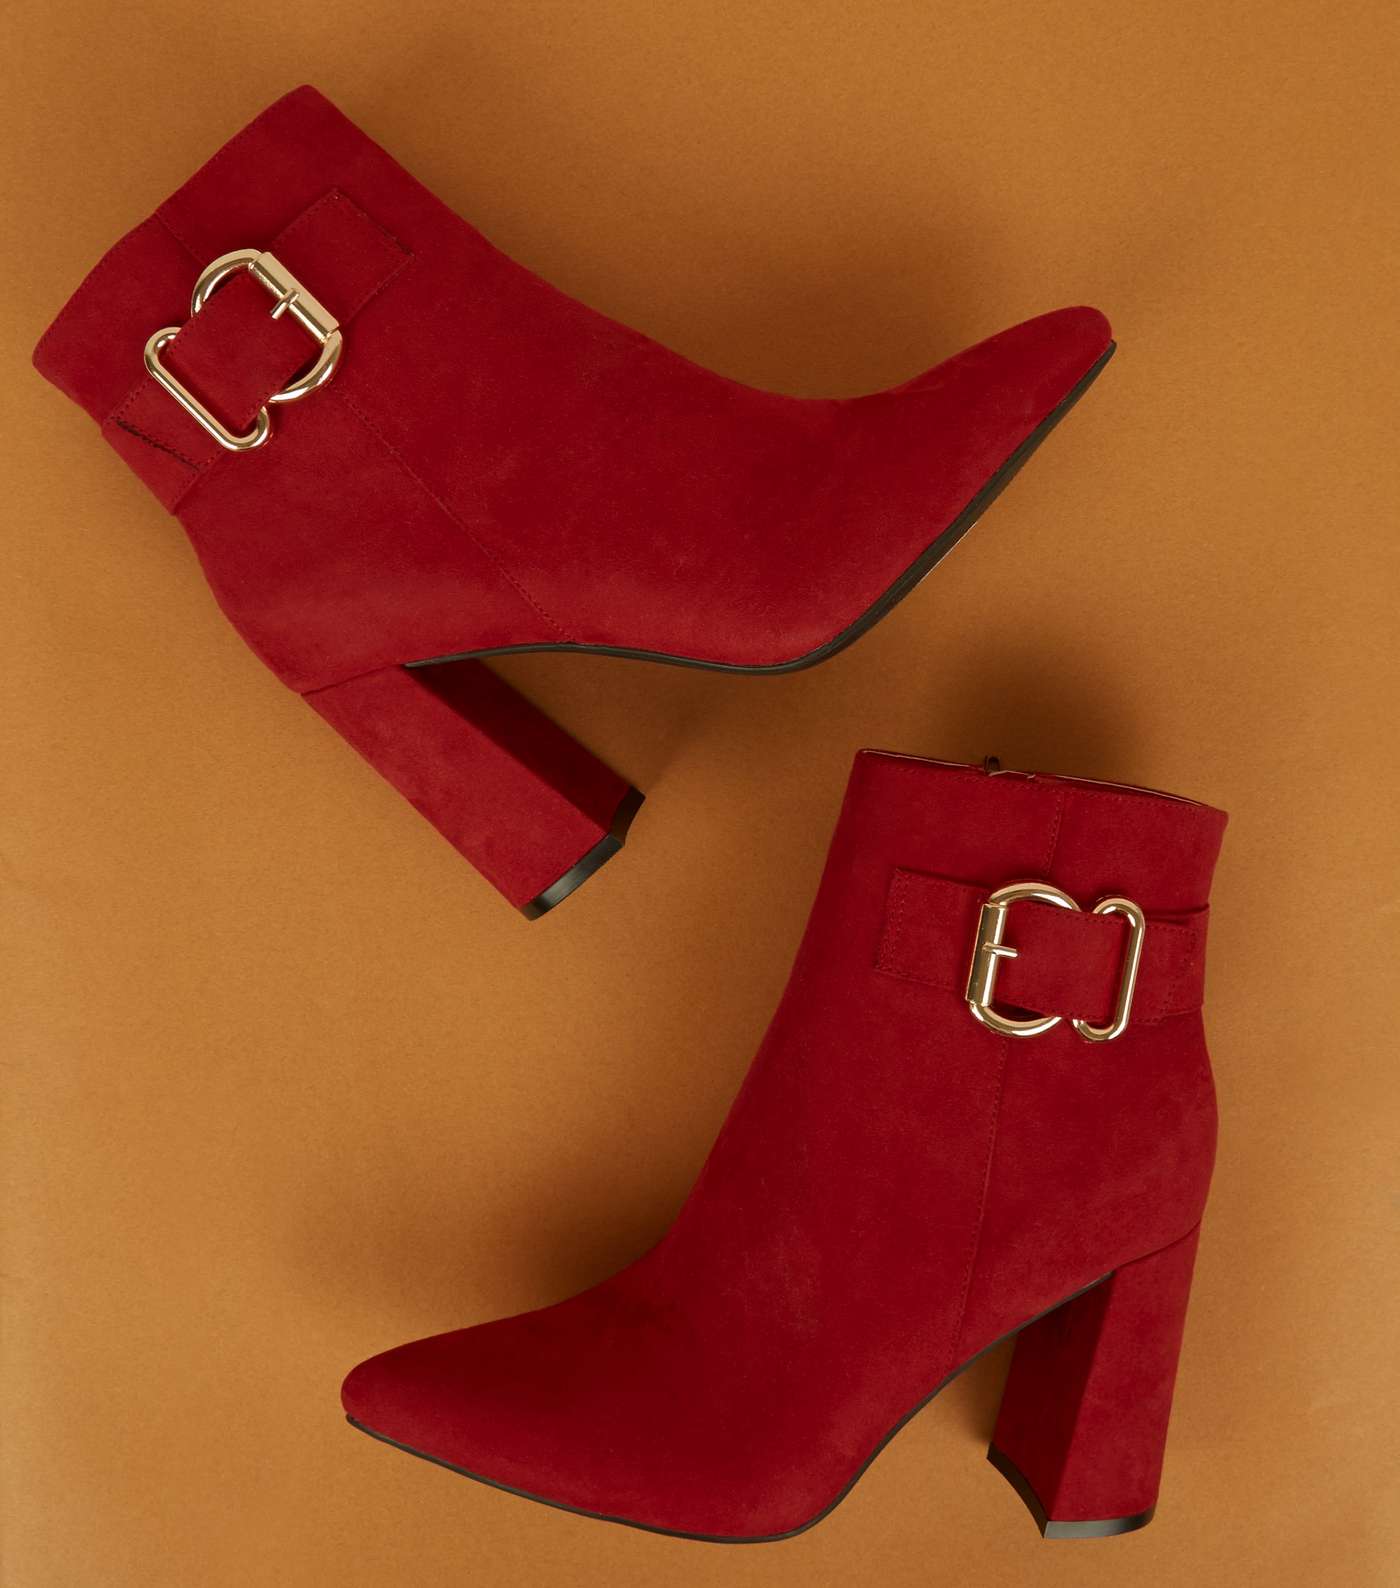 Red Suedette Buckle Side Flared Heel Boots Image 4